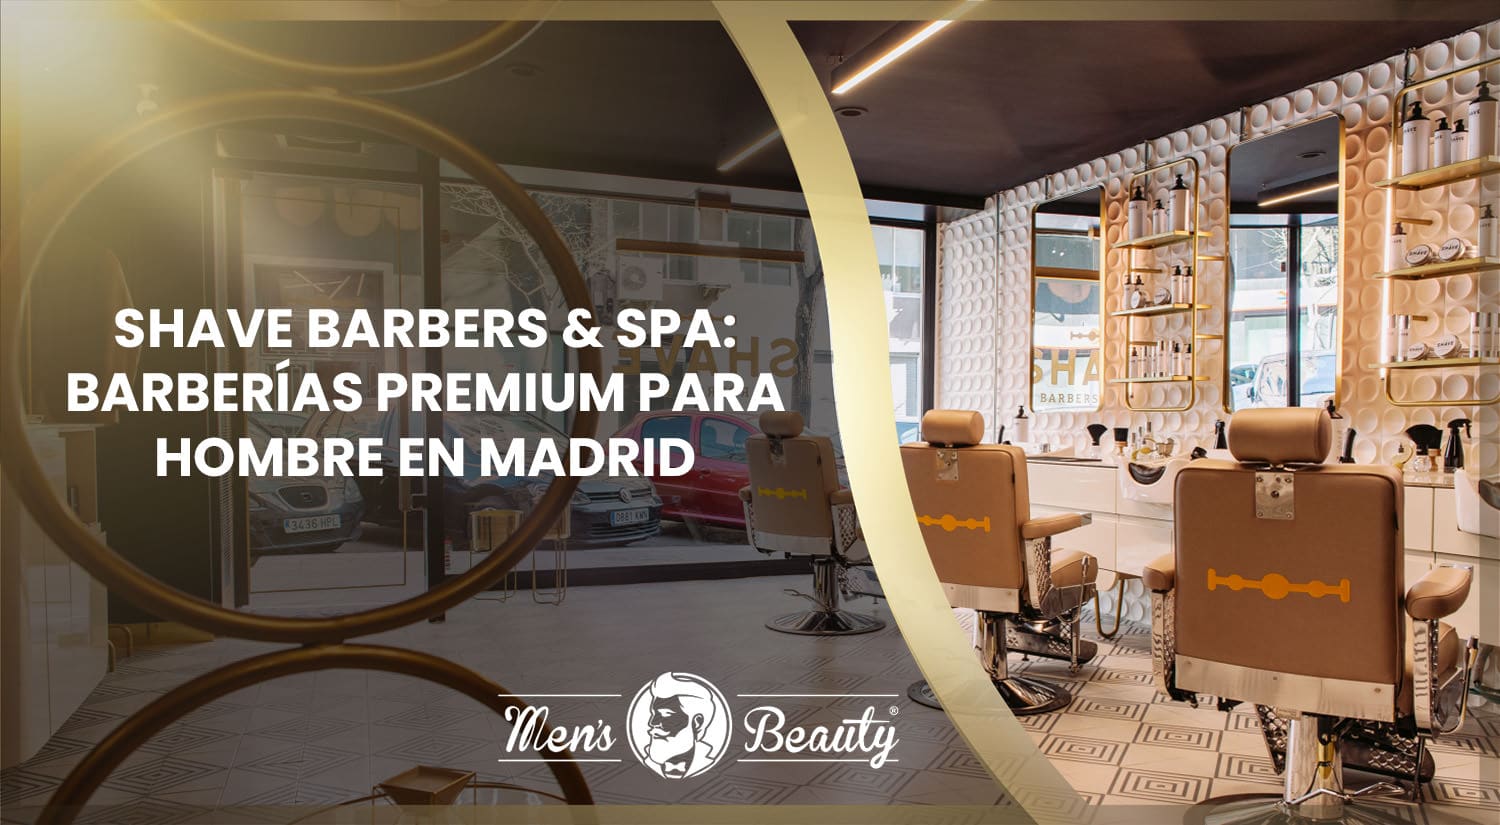 mejores barberias para hombre madrid shave barbers spa the shave club